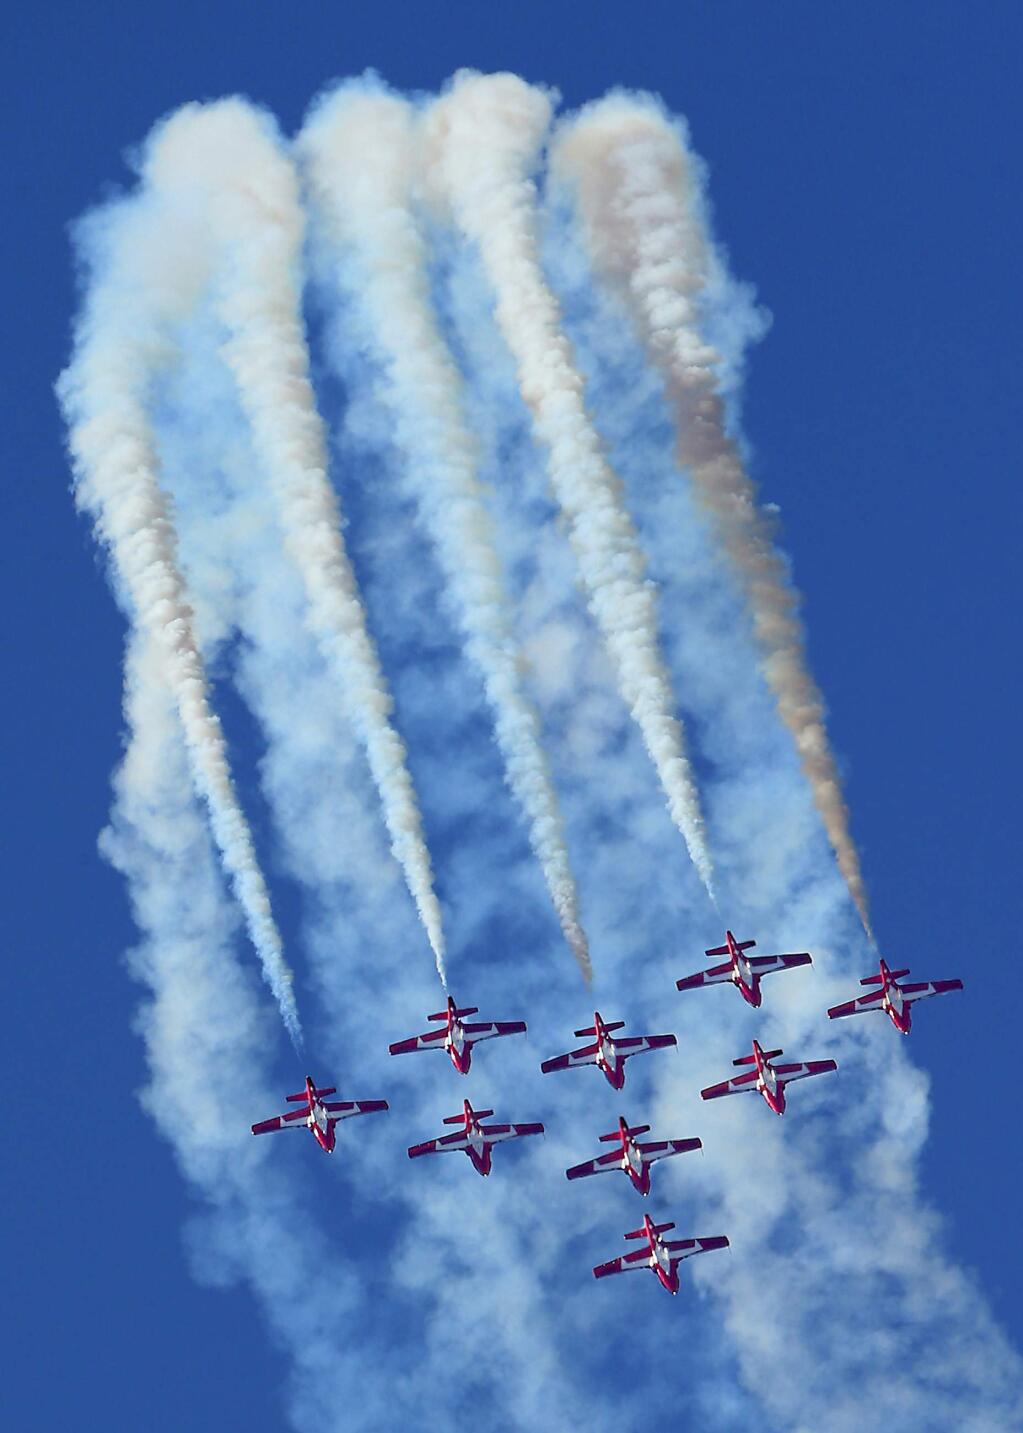 The Canadian Forces Snowbirds in formation for the finale at the Wings Over Wine County Airshow 2015 at the Charles M. Schulz Sonoma County Airport on Saturday. (JOHN BURGESS / The Press Democrat)